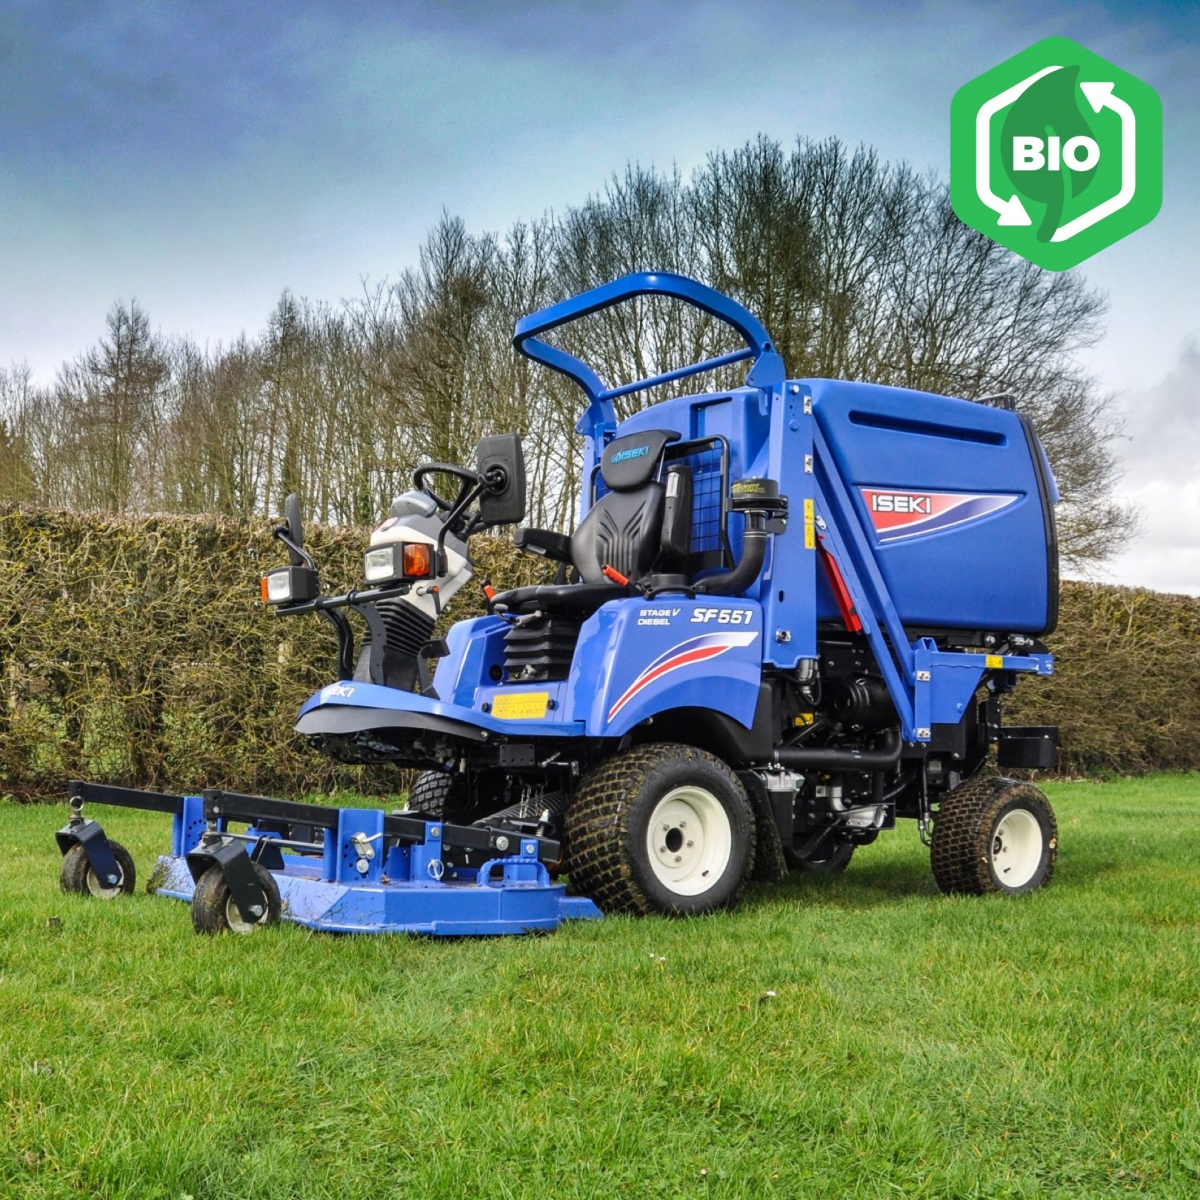 Iseki SF544 + SF551 Out-Front Mower Collectors